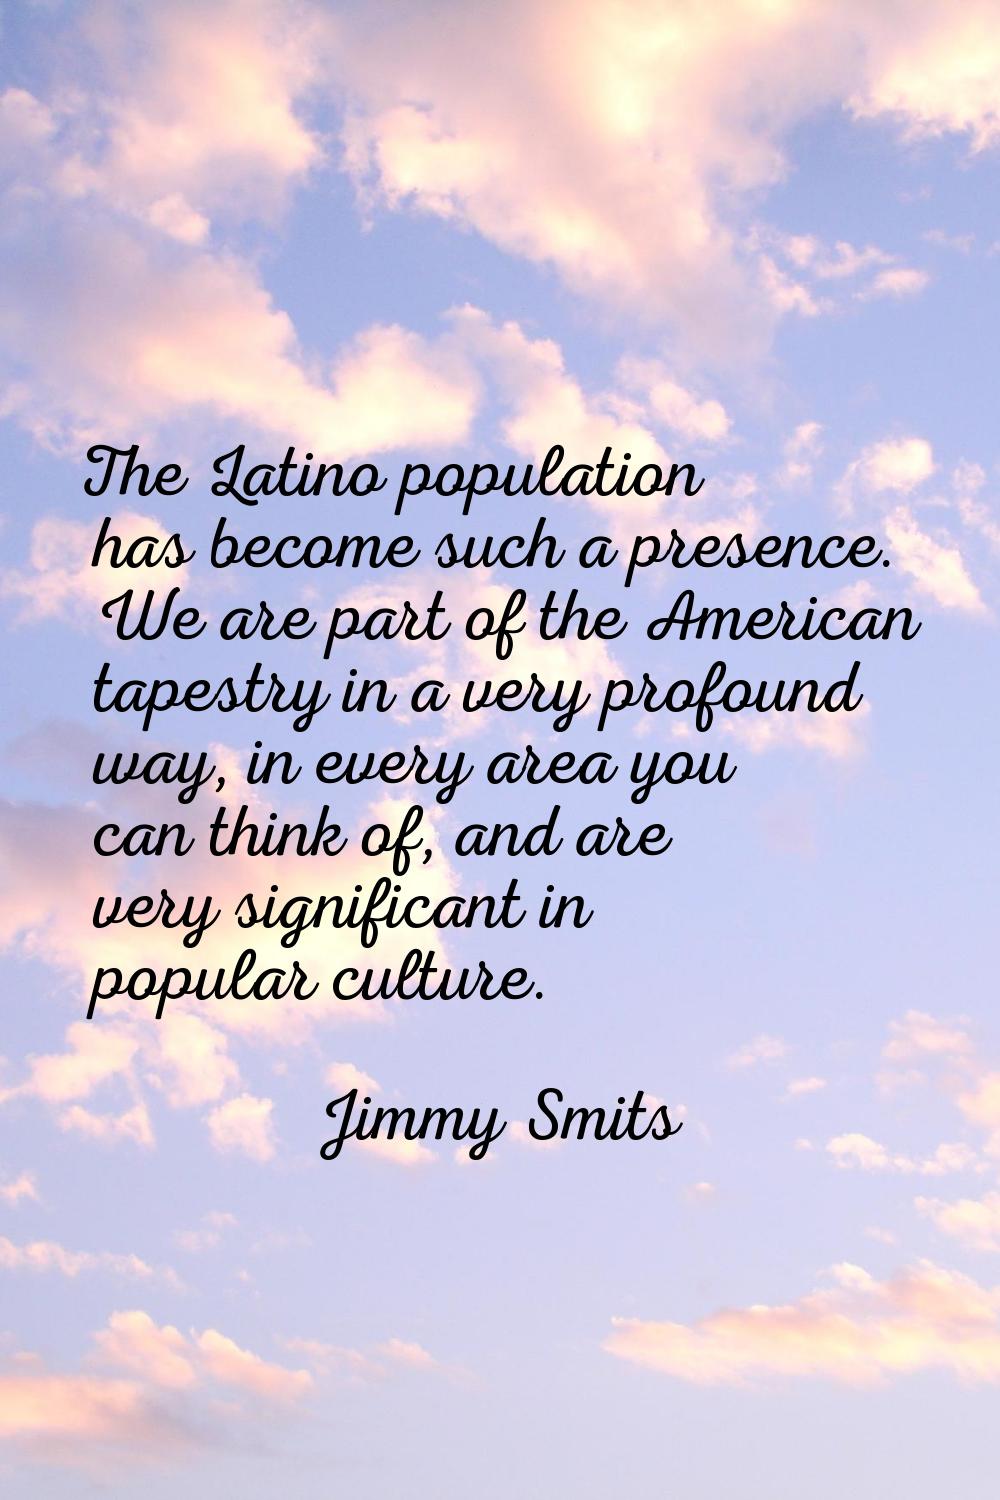 The Latino population has become such a presence. We are part of the American tapestry in a very pr